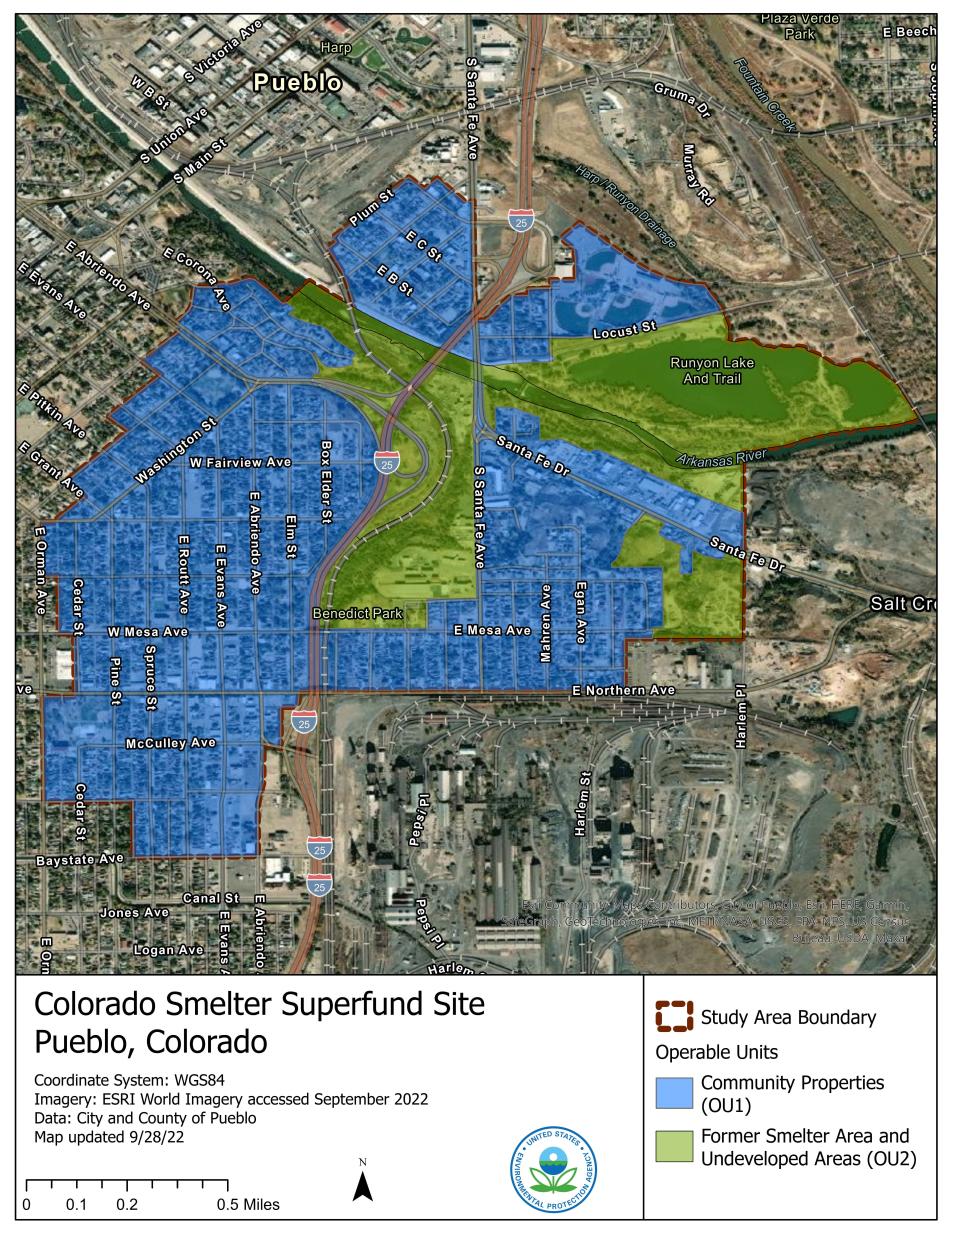 A map of the Colorado Smelter Superfund Site